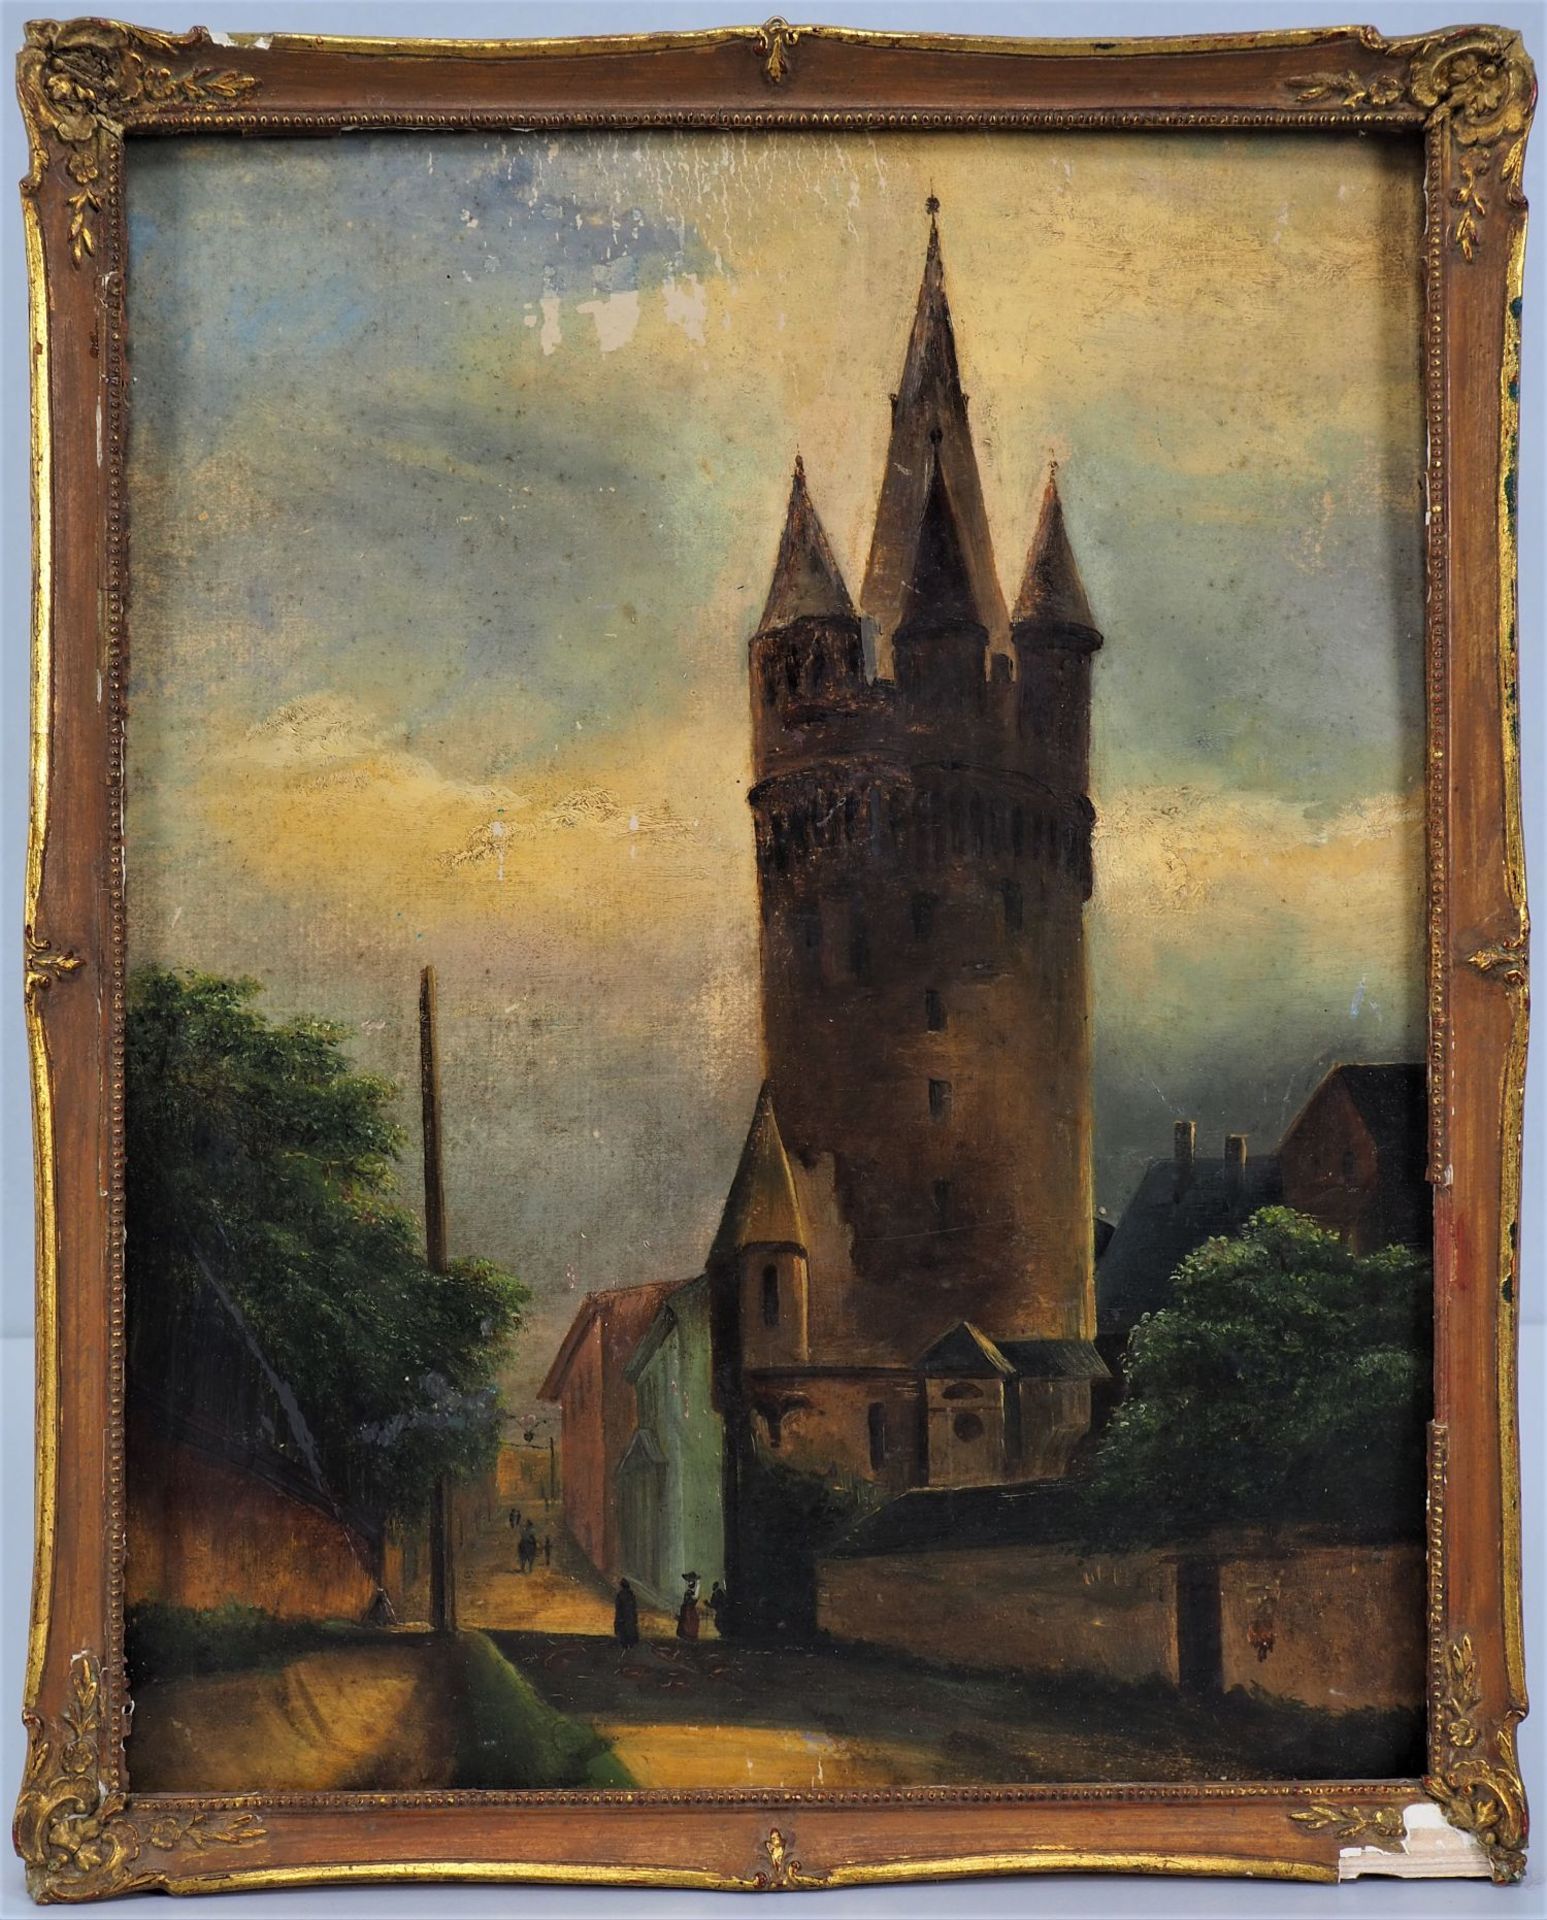 Street view with medieval tower, 19th century